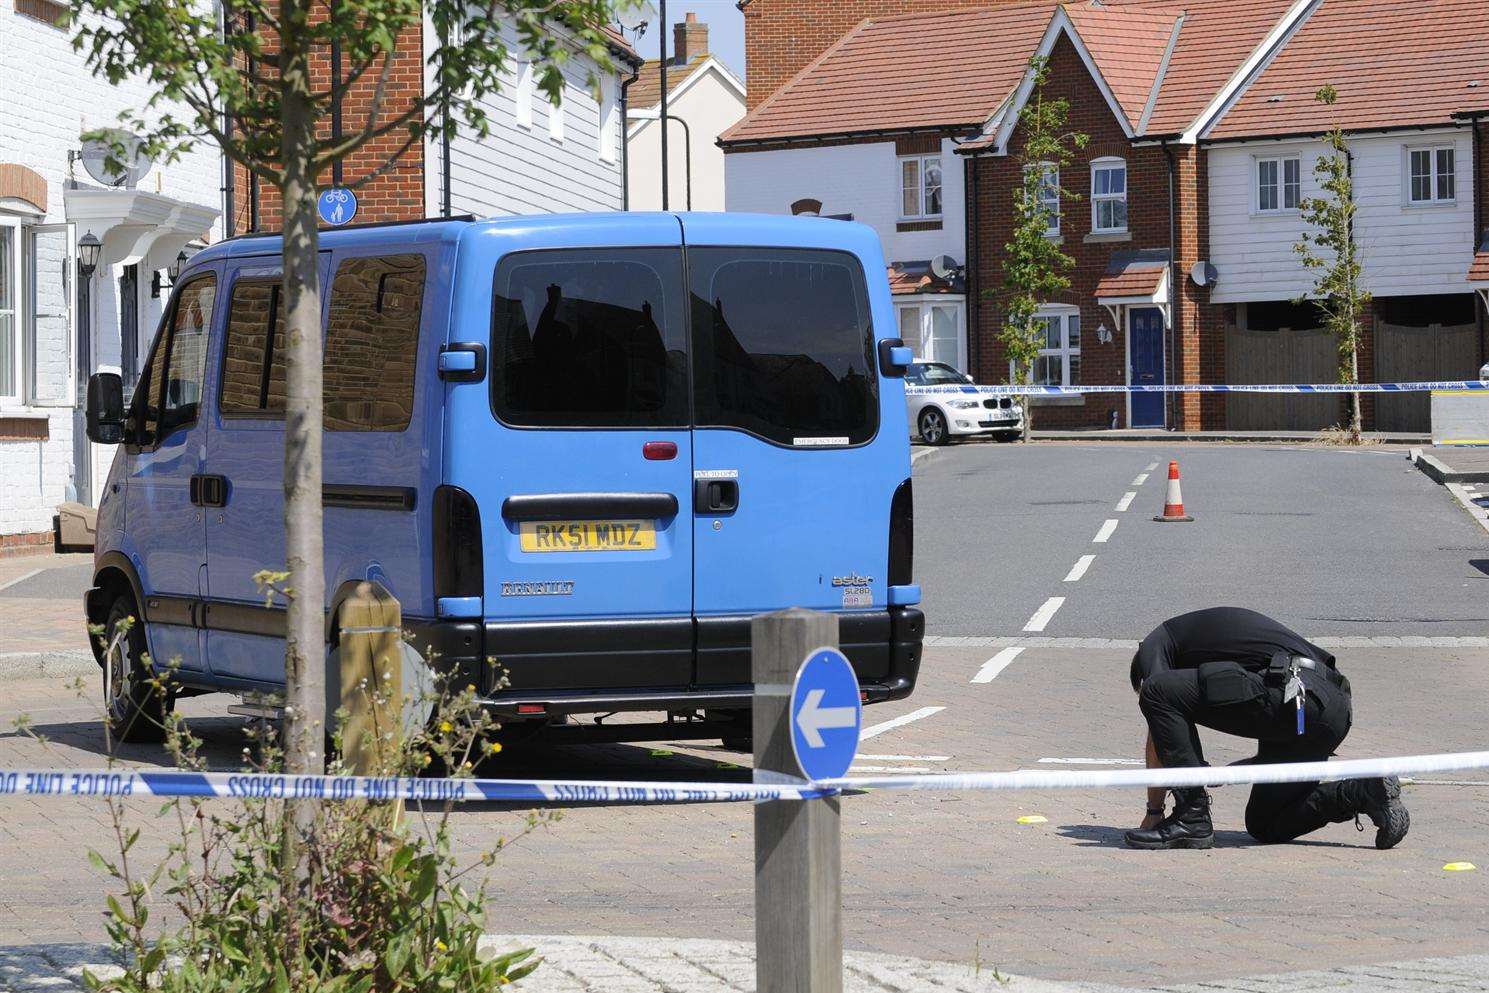 Police at the scene of the road rage attack in Kingsnorth